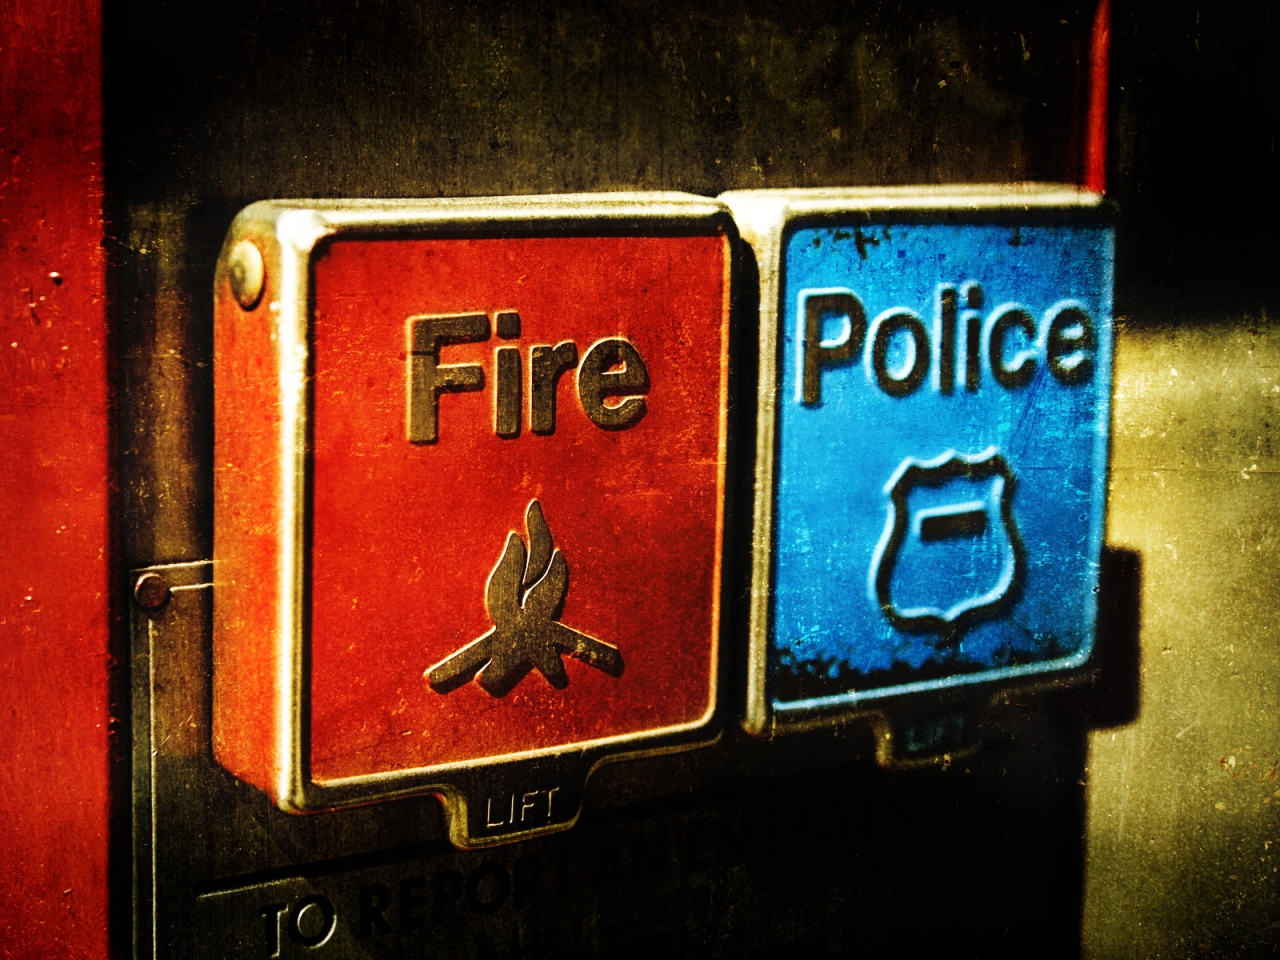 Emergency Fire and Police for 1280 x 960 resolution